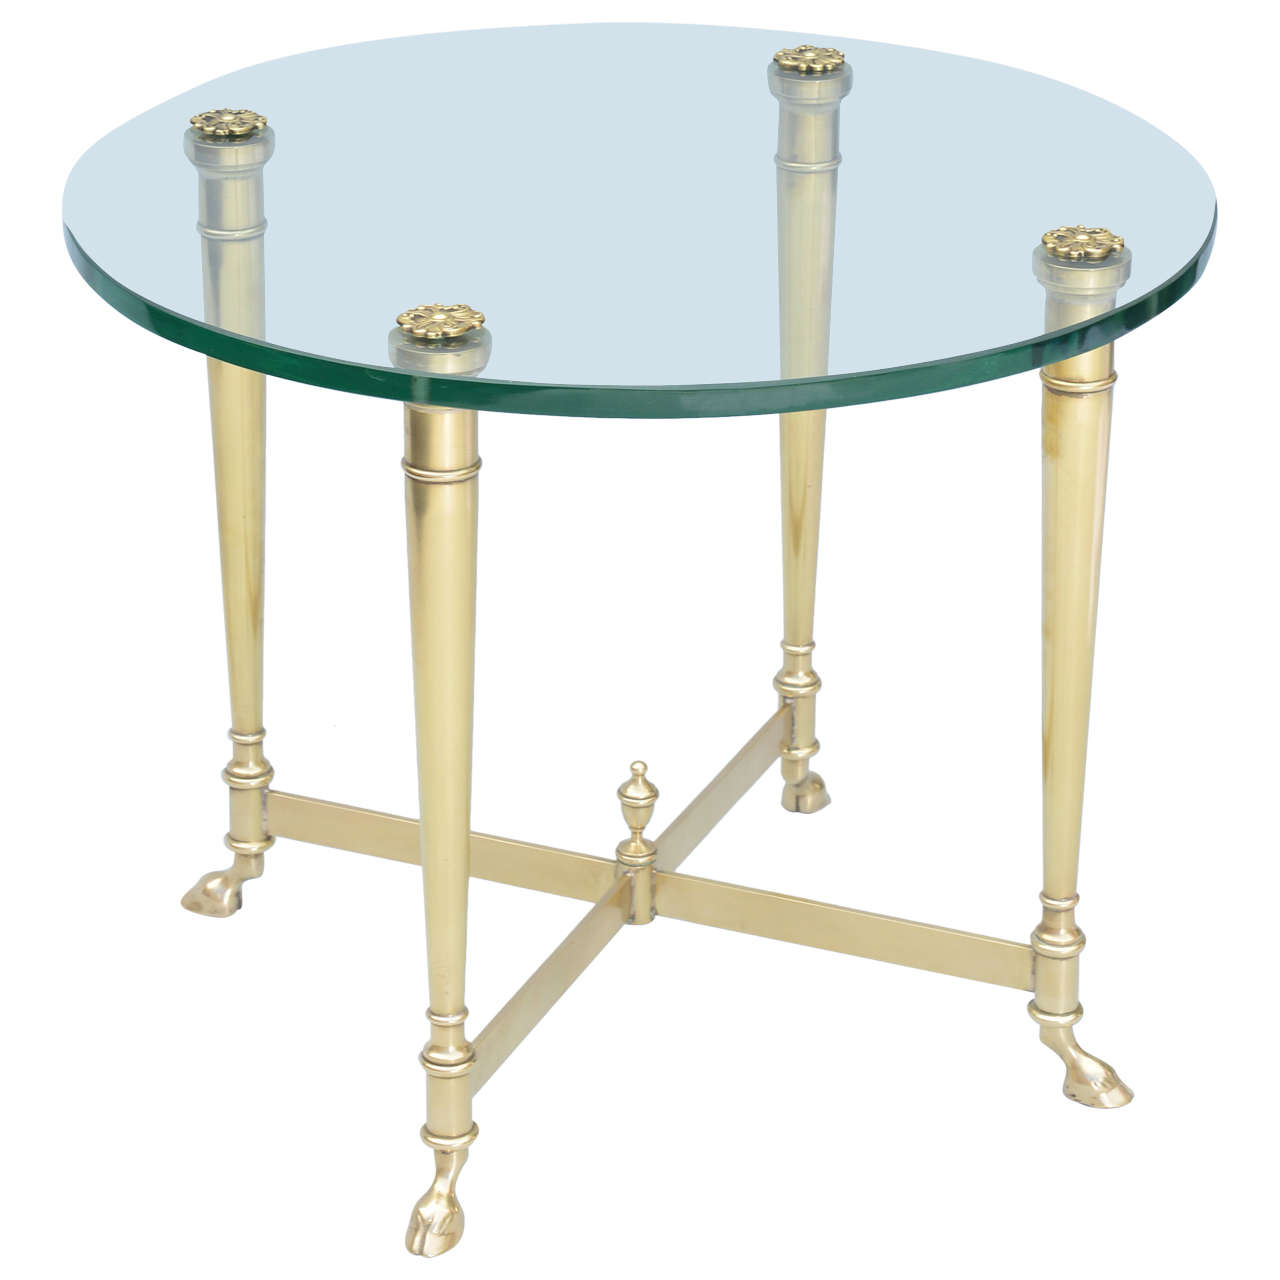 Polished Brass End Table with Glass Top on Hooved Feet